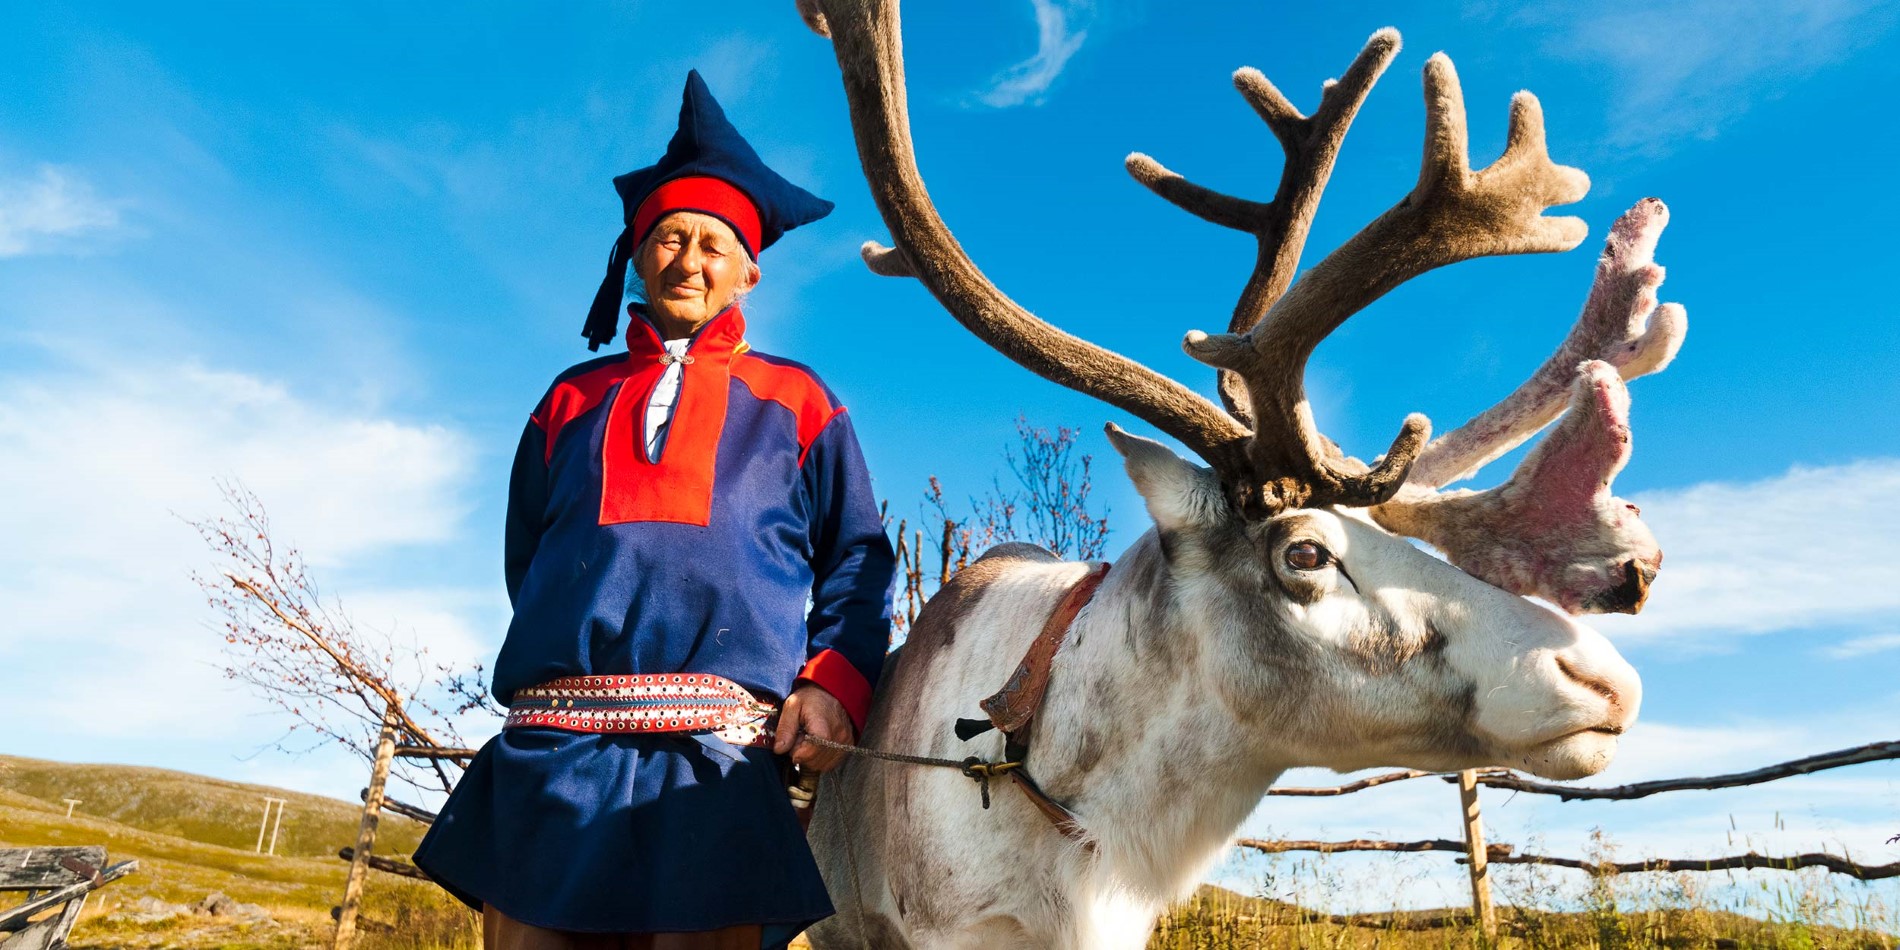 Reindeers are essential for Sami culture and life